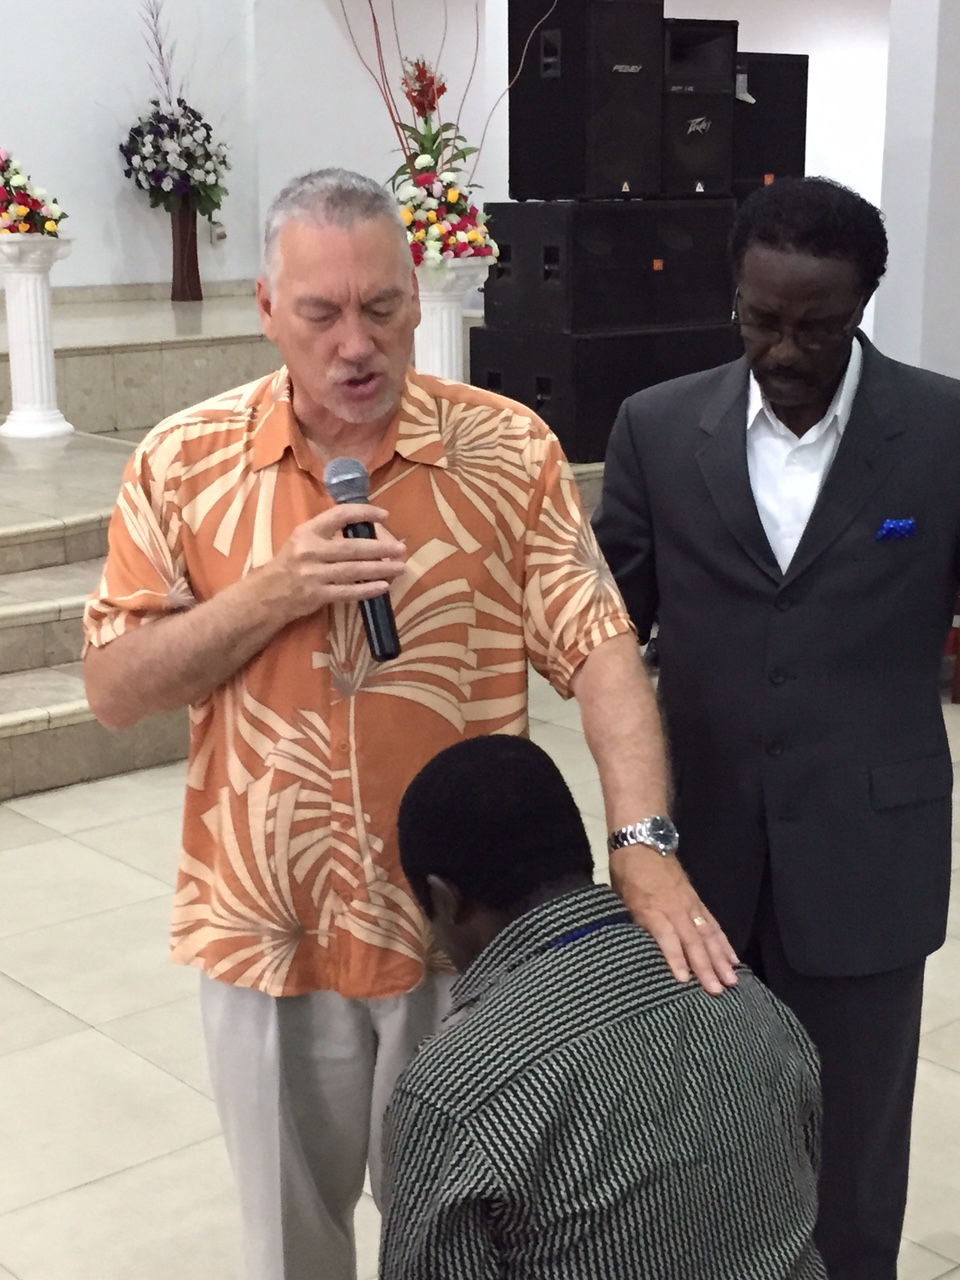 Man praying, another man standing over him with hand on shoulder 